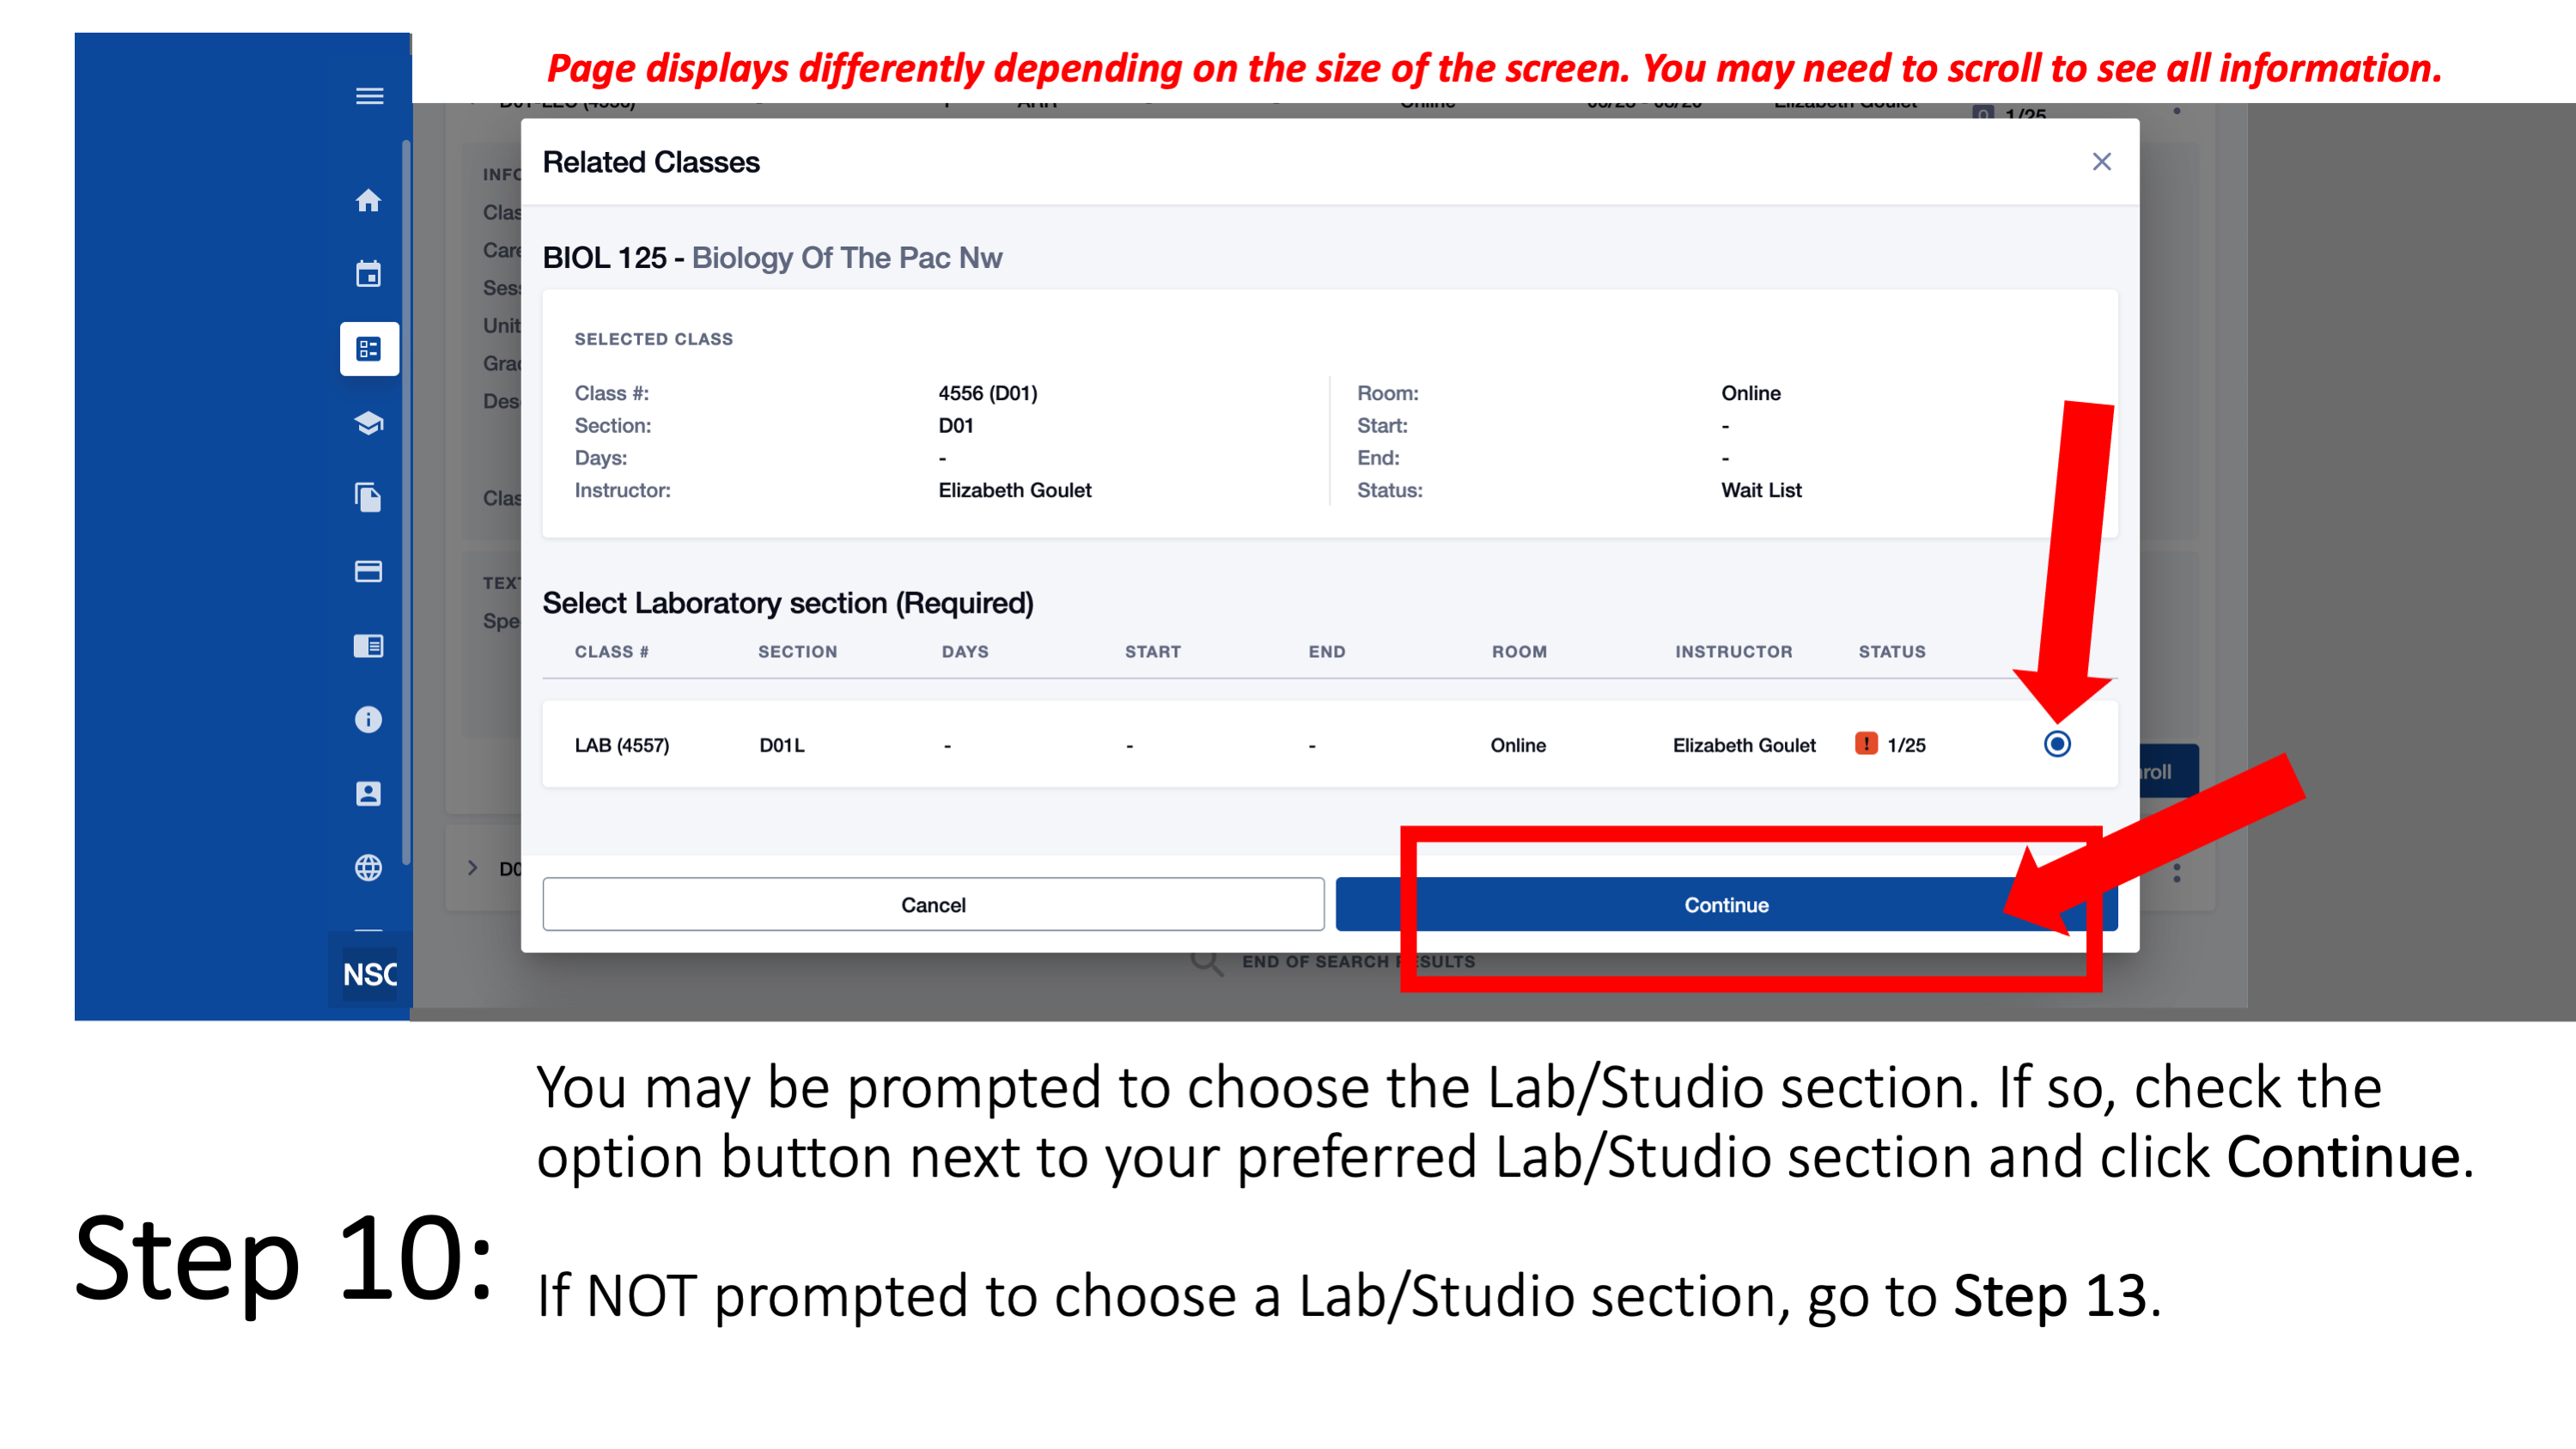 Step 10: You may be prompted to choose the Lab/Studio section. If so, check the option button next to your preferred Lab/Studio section and click Continue. If NOT prompted to choose a Lab/Studio section, go to Step 13. Page displays differently depending on the size of the screen. You may need to scroll to see all information.